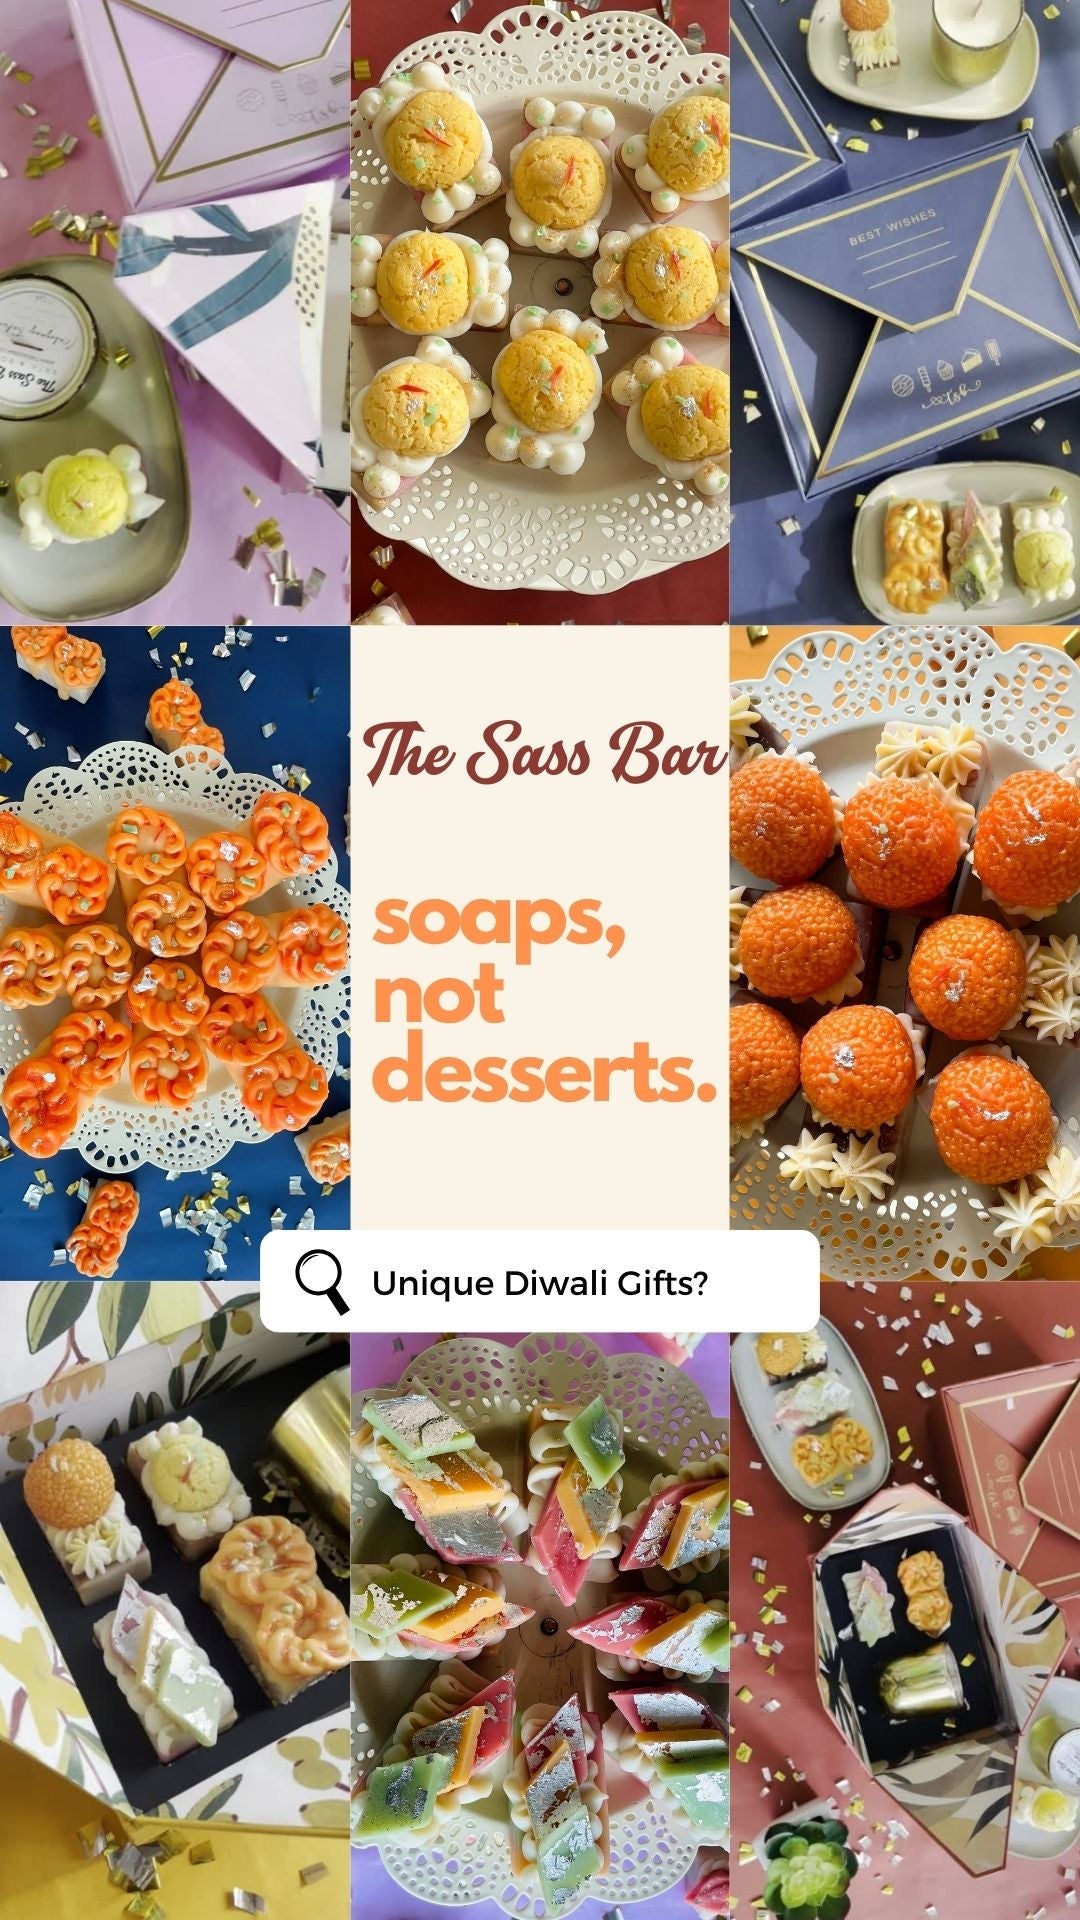 Unique Diwali Gift That is not Mithai! - THE SASS BAR